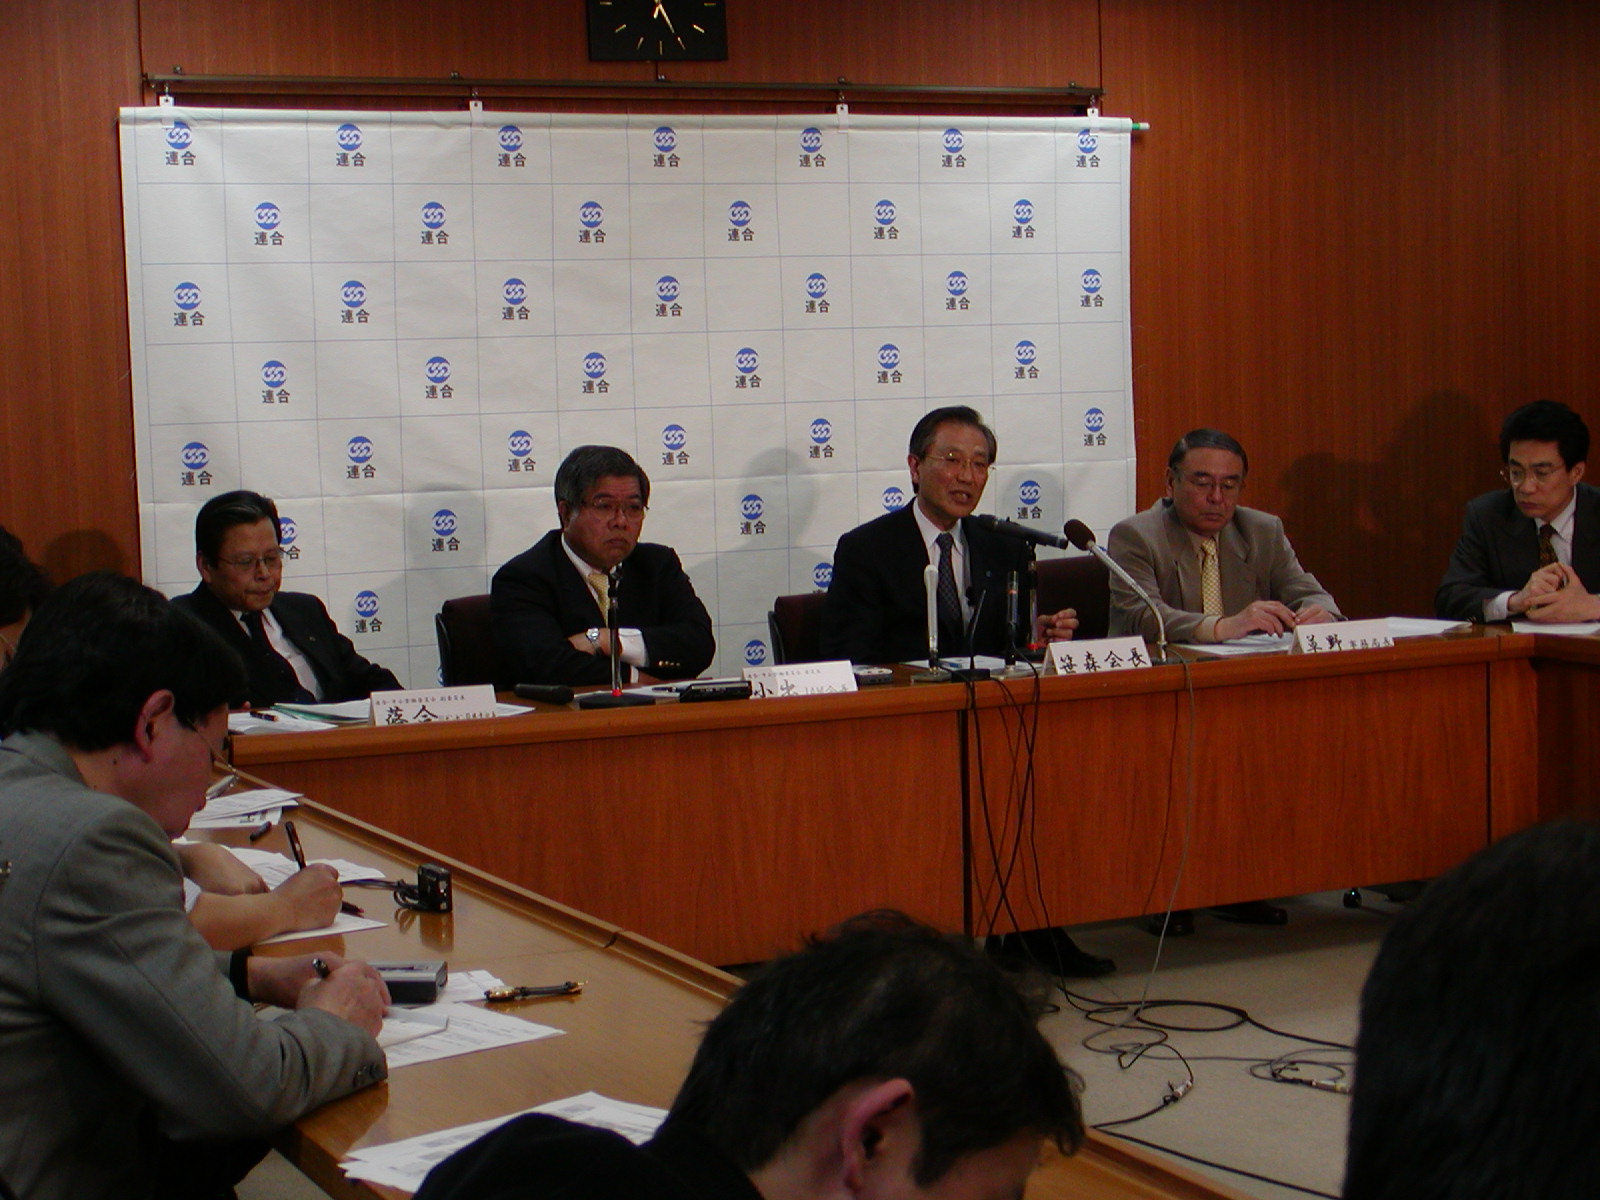 Photo: RENGO praised the results of small-and-medium-sized/local union demands. (March 25, RENGO headquarters)